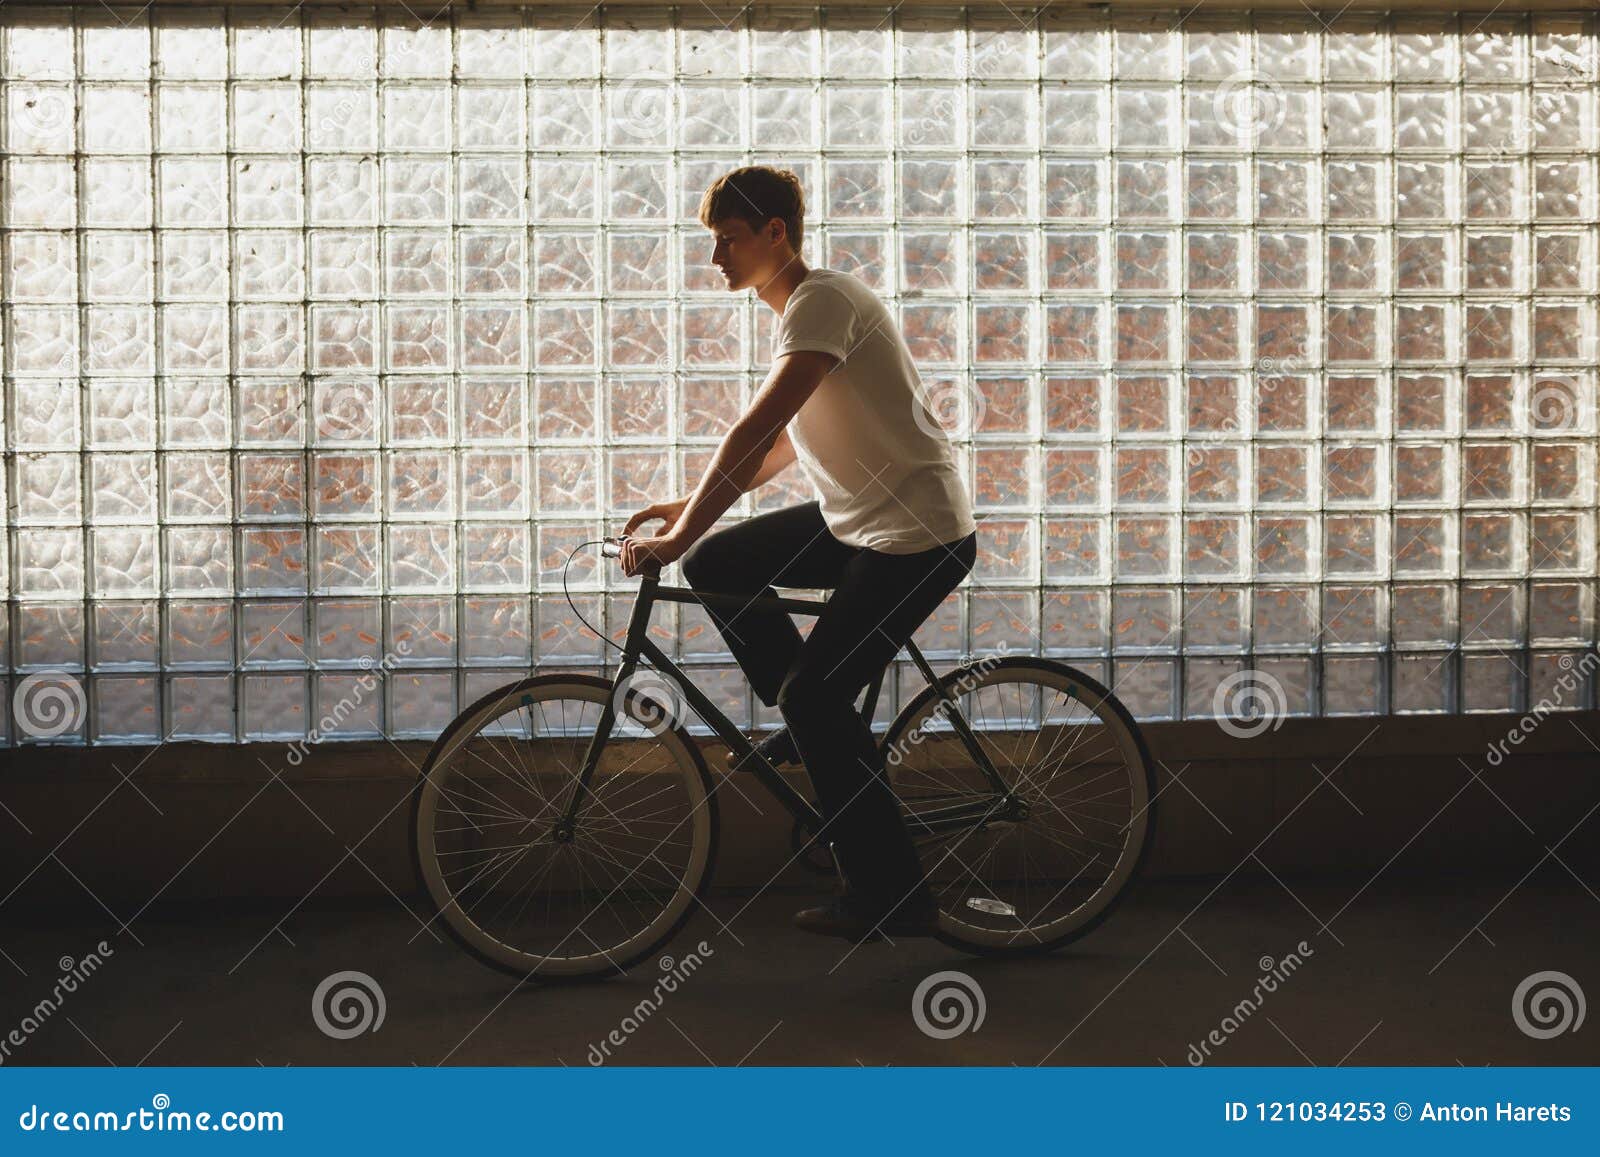 Cool Boy Riding Classic Bicycle and Looking Straight. Young Man in ...